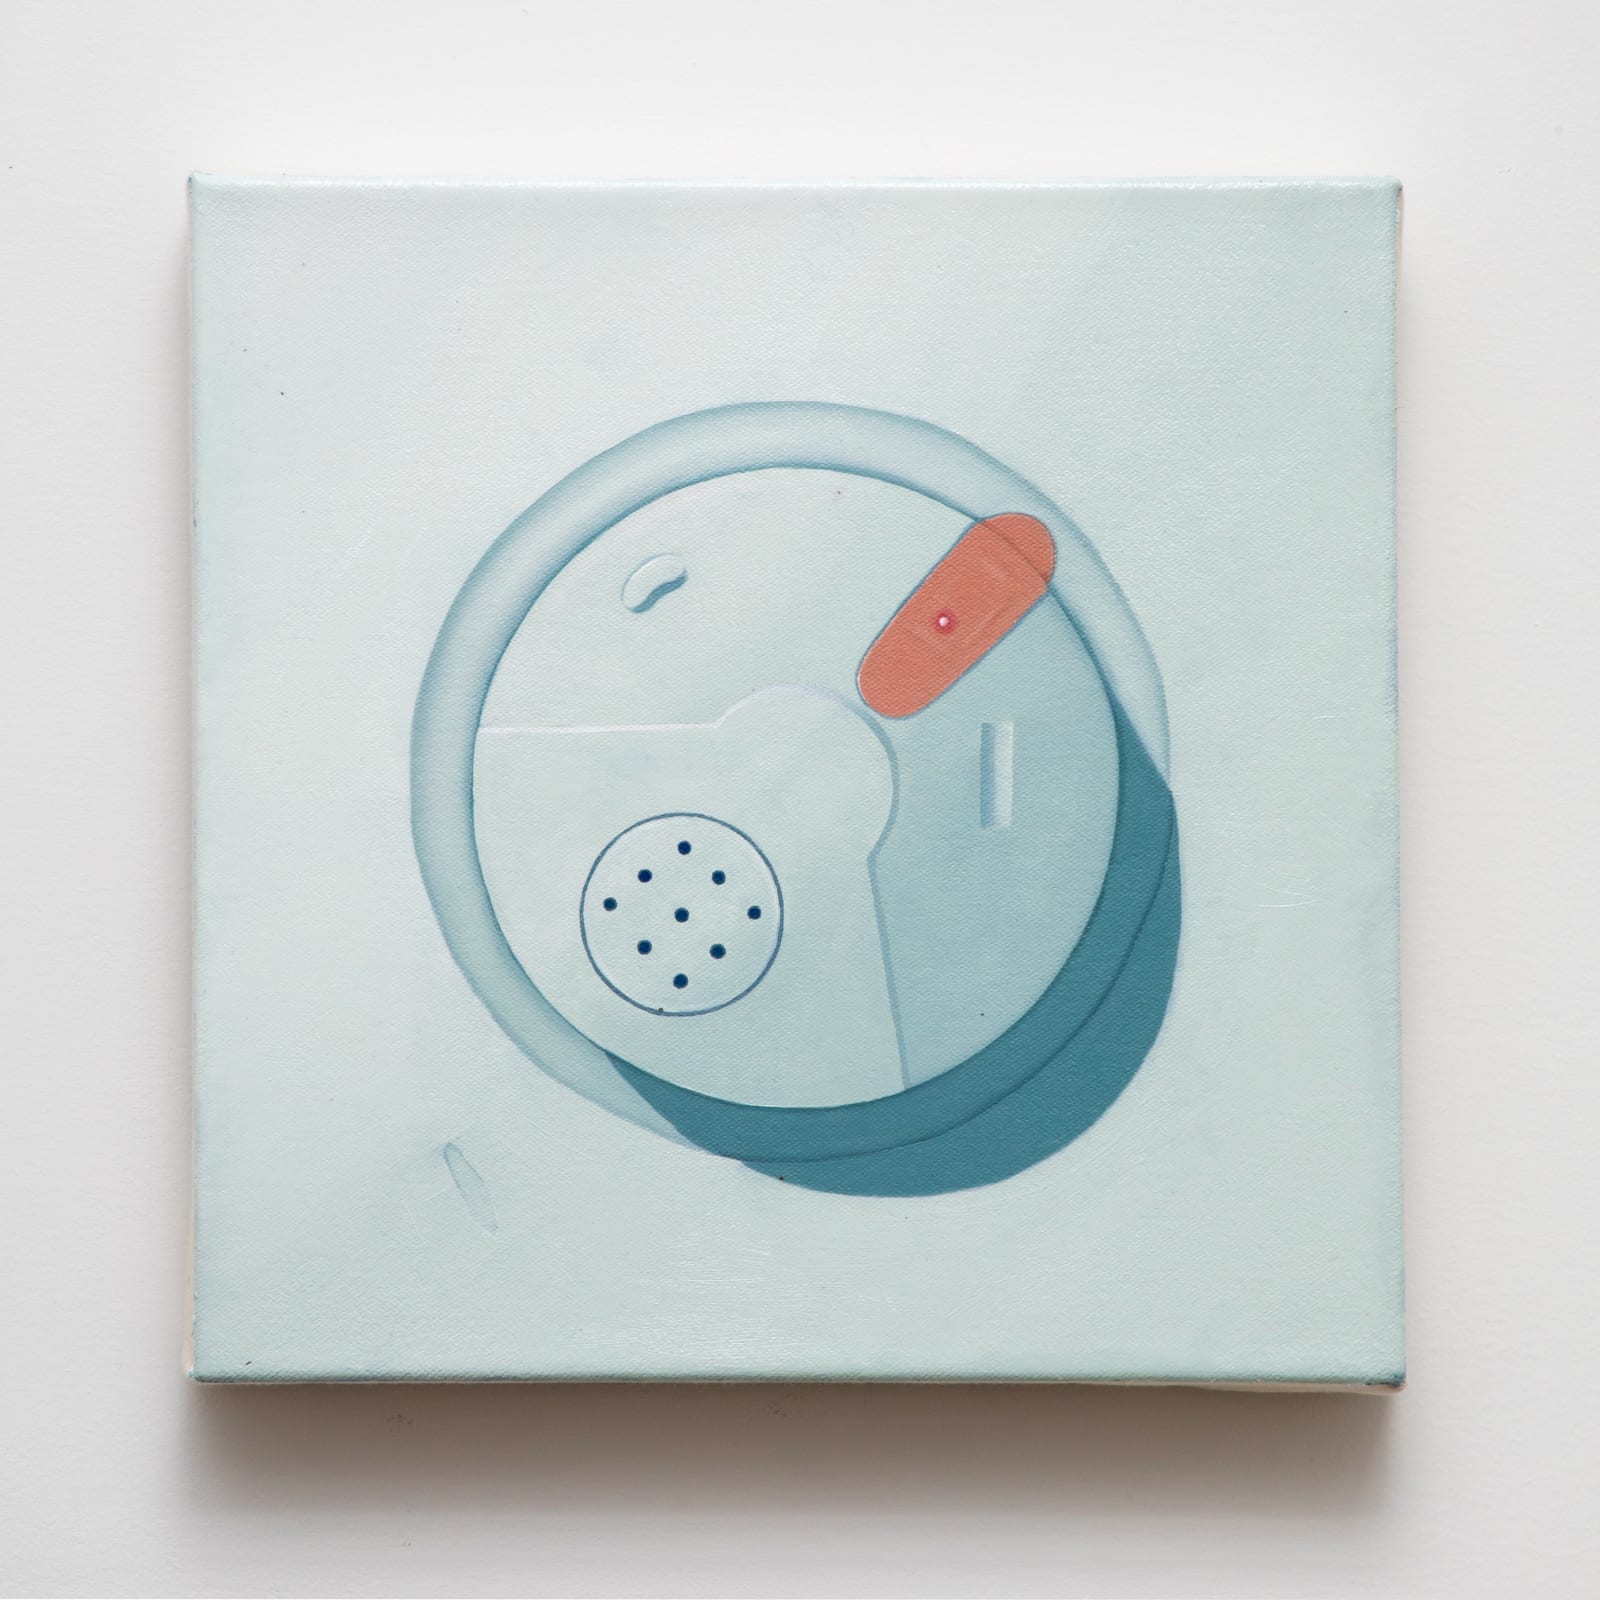 Painting portraying a band-aid placed over the light of a smoke-detector as the action of disregarding warning signs.